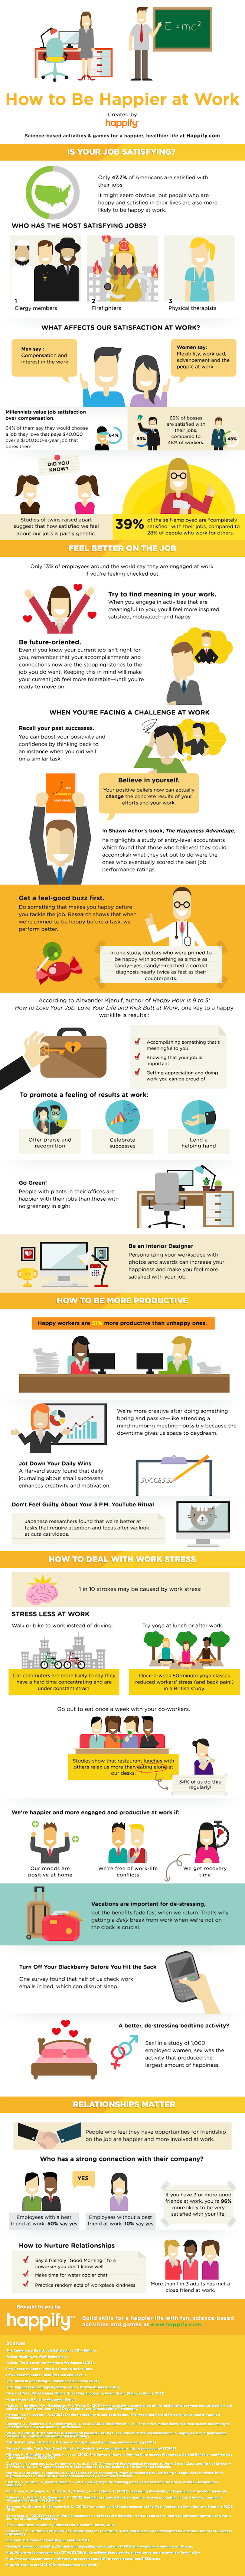 how to be happy at work infographic